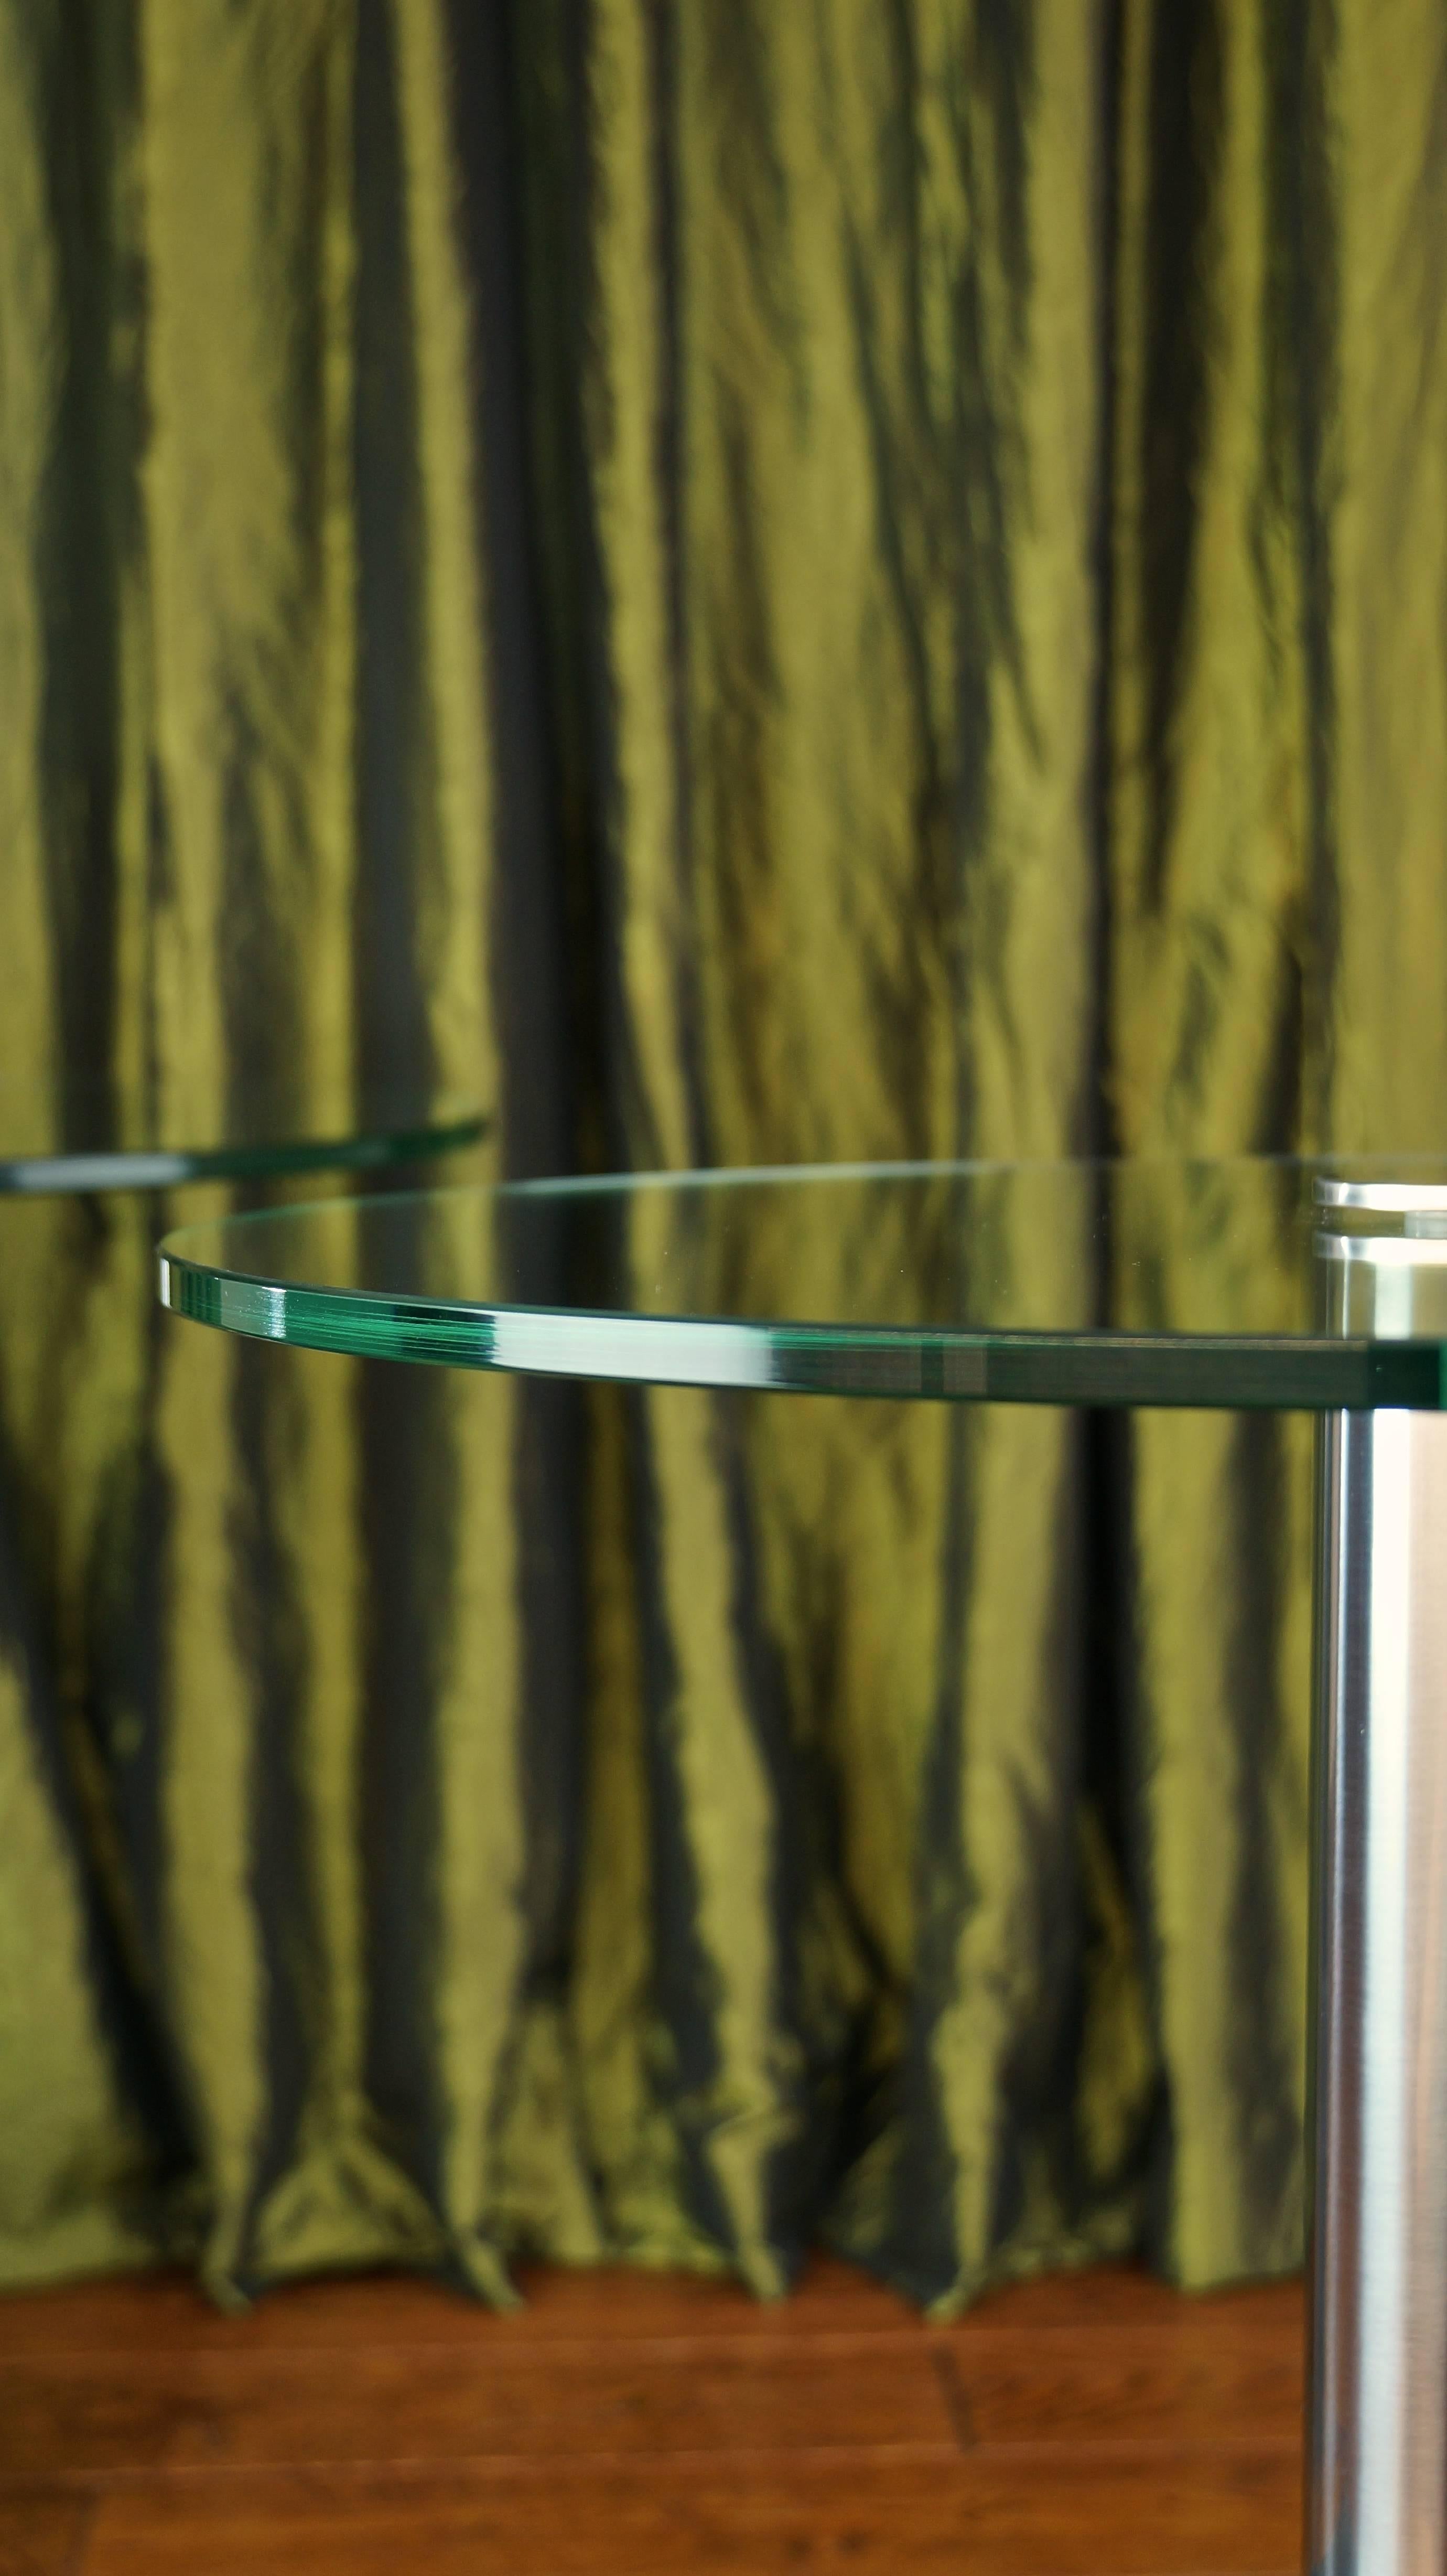 Pair of Vintage Marble and Glass HK2 Side Tables by Hank Kwint, Metaform 1980s For Sale 8